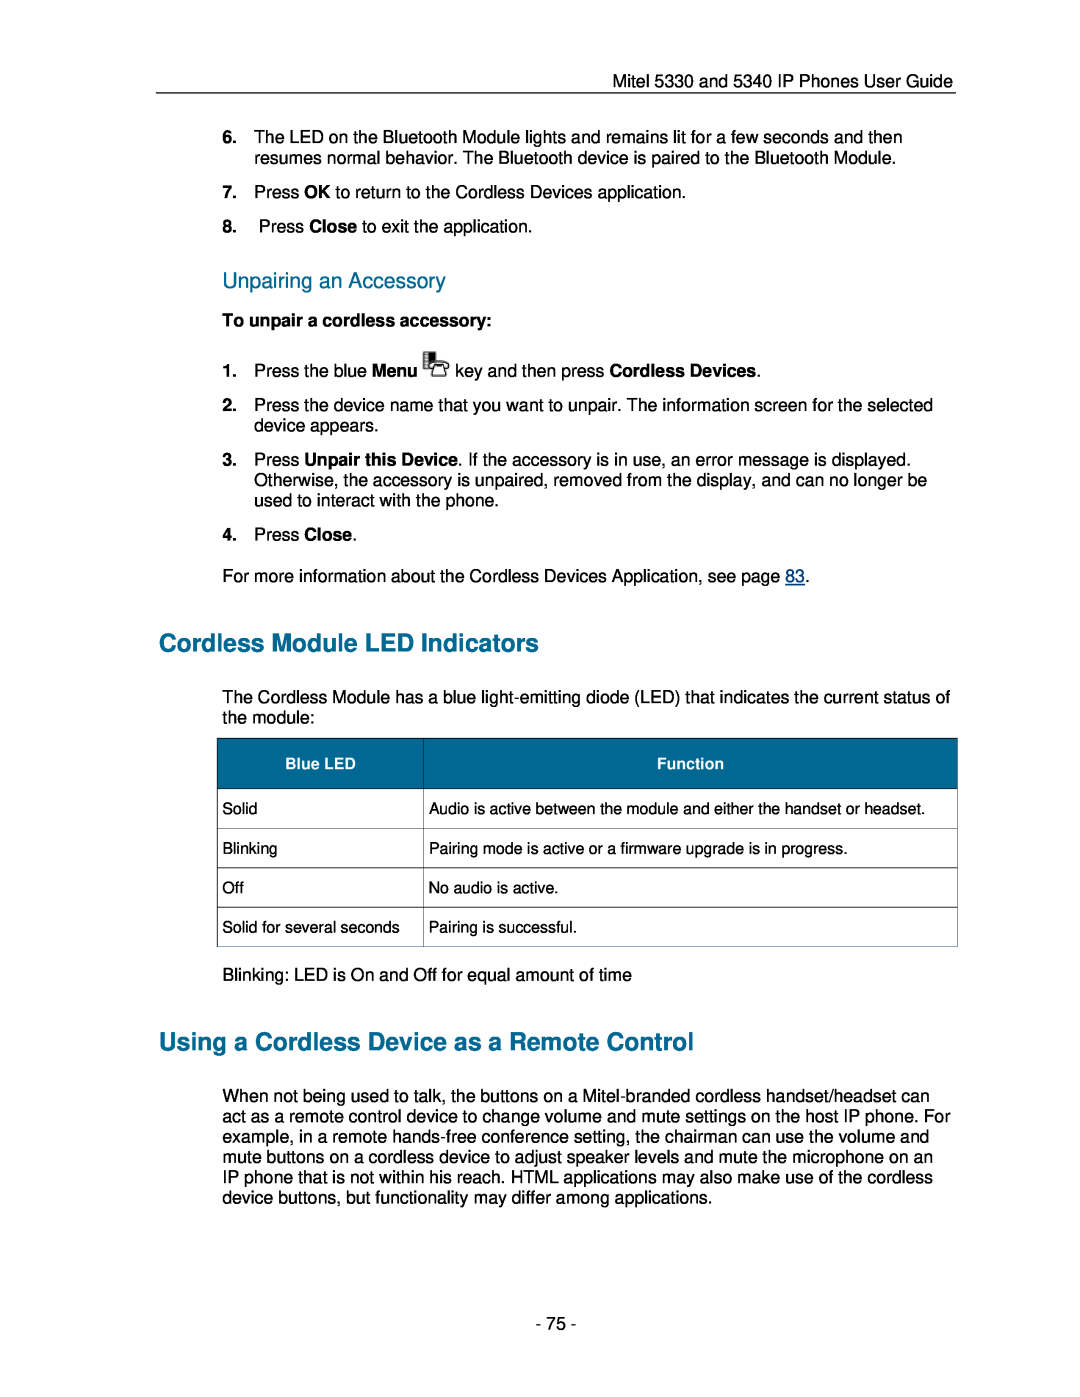 Mitel 5330 manual Cordless Module LED Indicators, Using a Cordless Device as a Remote Control, Unpairing an Accessory 